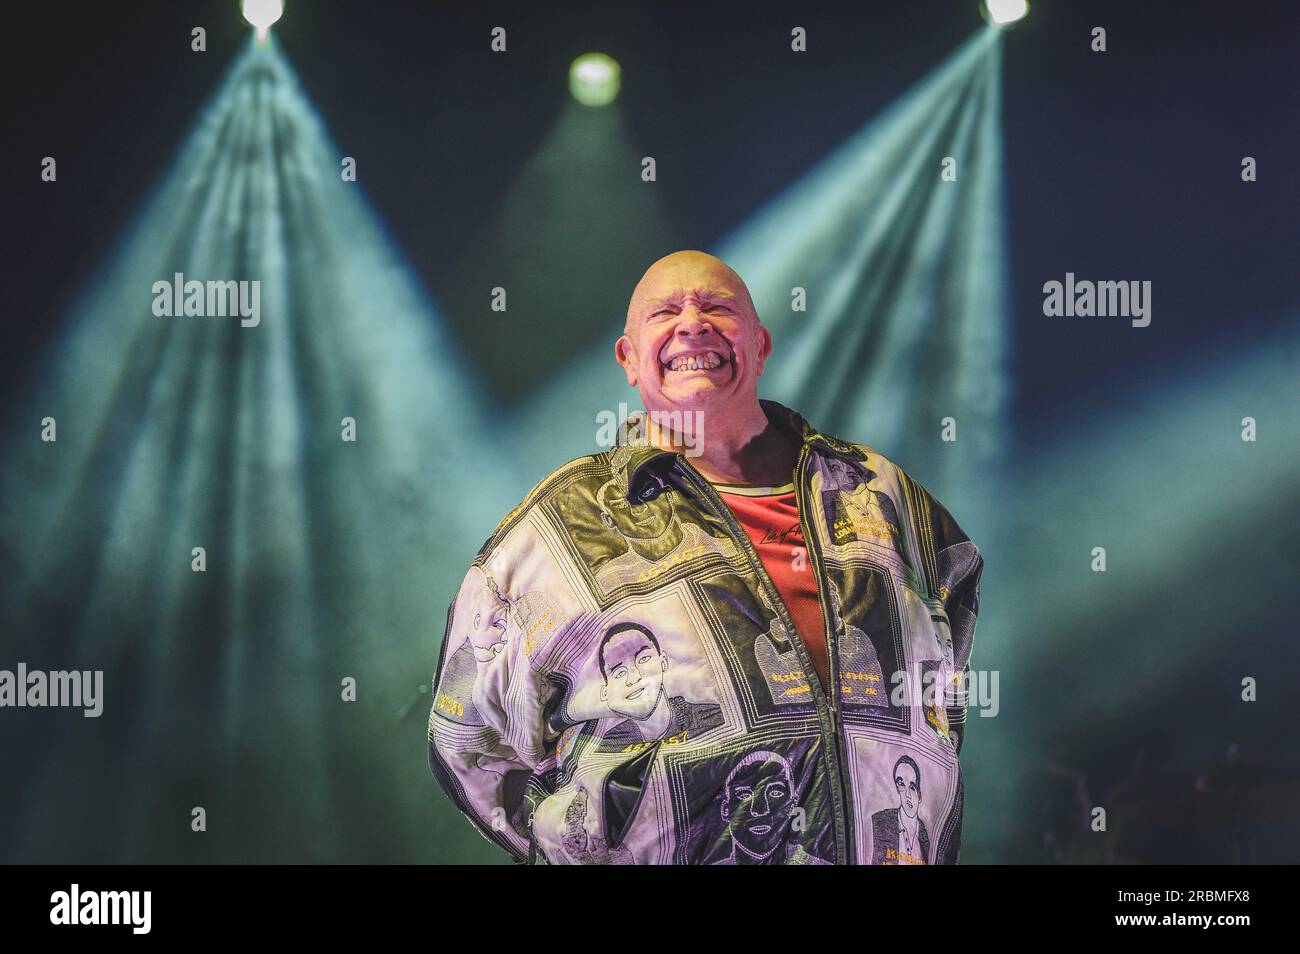 The Music in The Park event at Worden Park, Leyland. Buster Bloodvessel and Bad Manners. Picture by Paul Heyes, Sunday May 28, 2023. Stock Photo